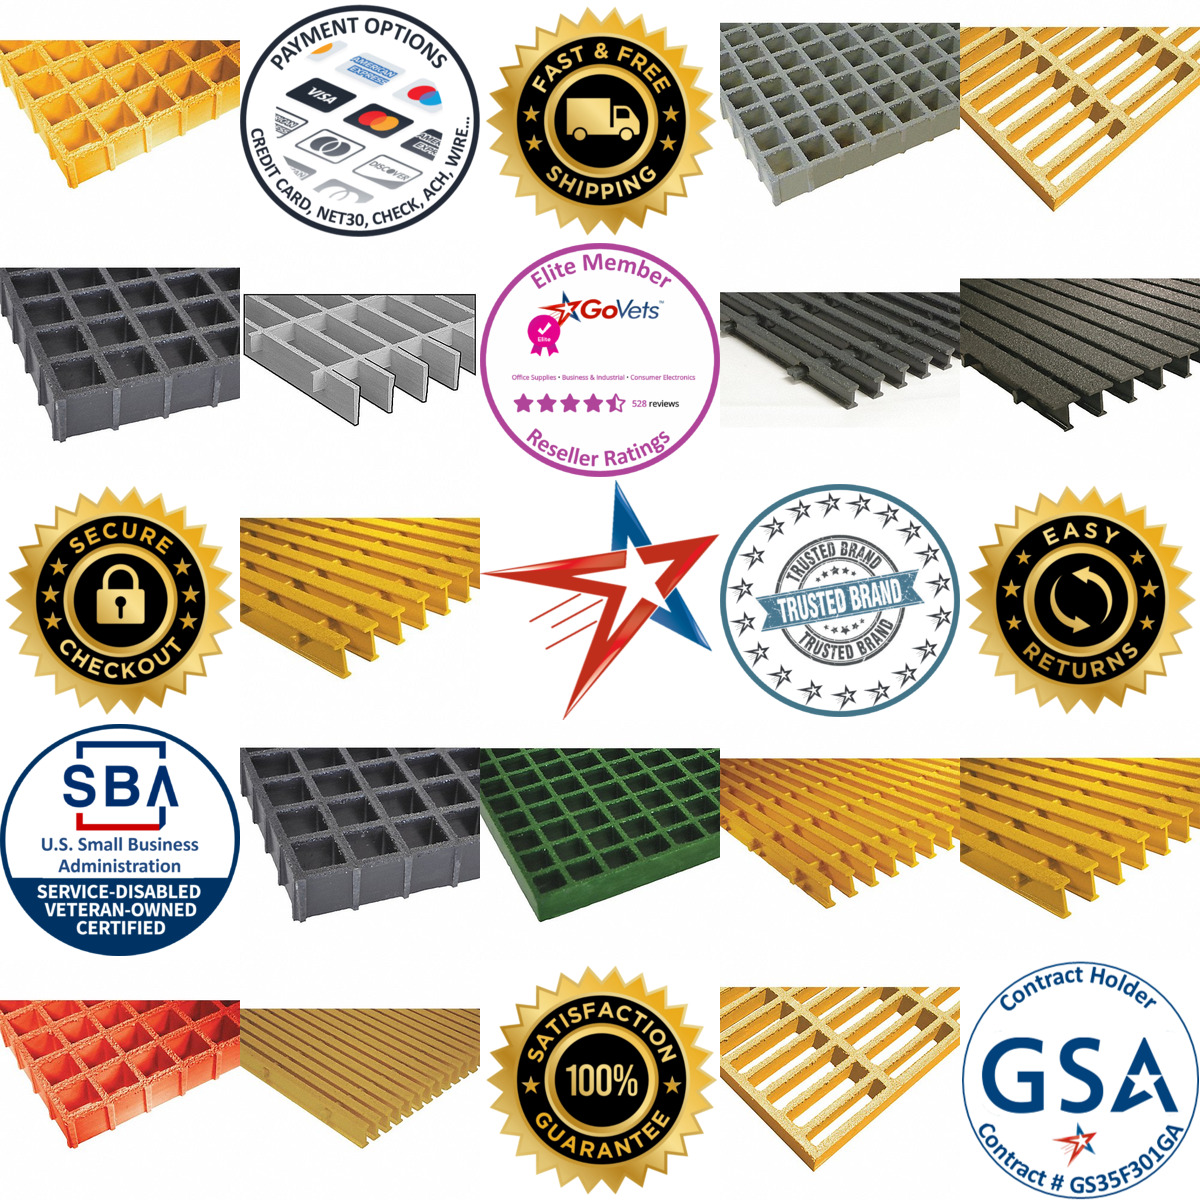 A selection of Fiberglass Grating products on GoVets